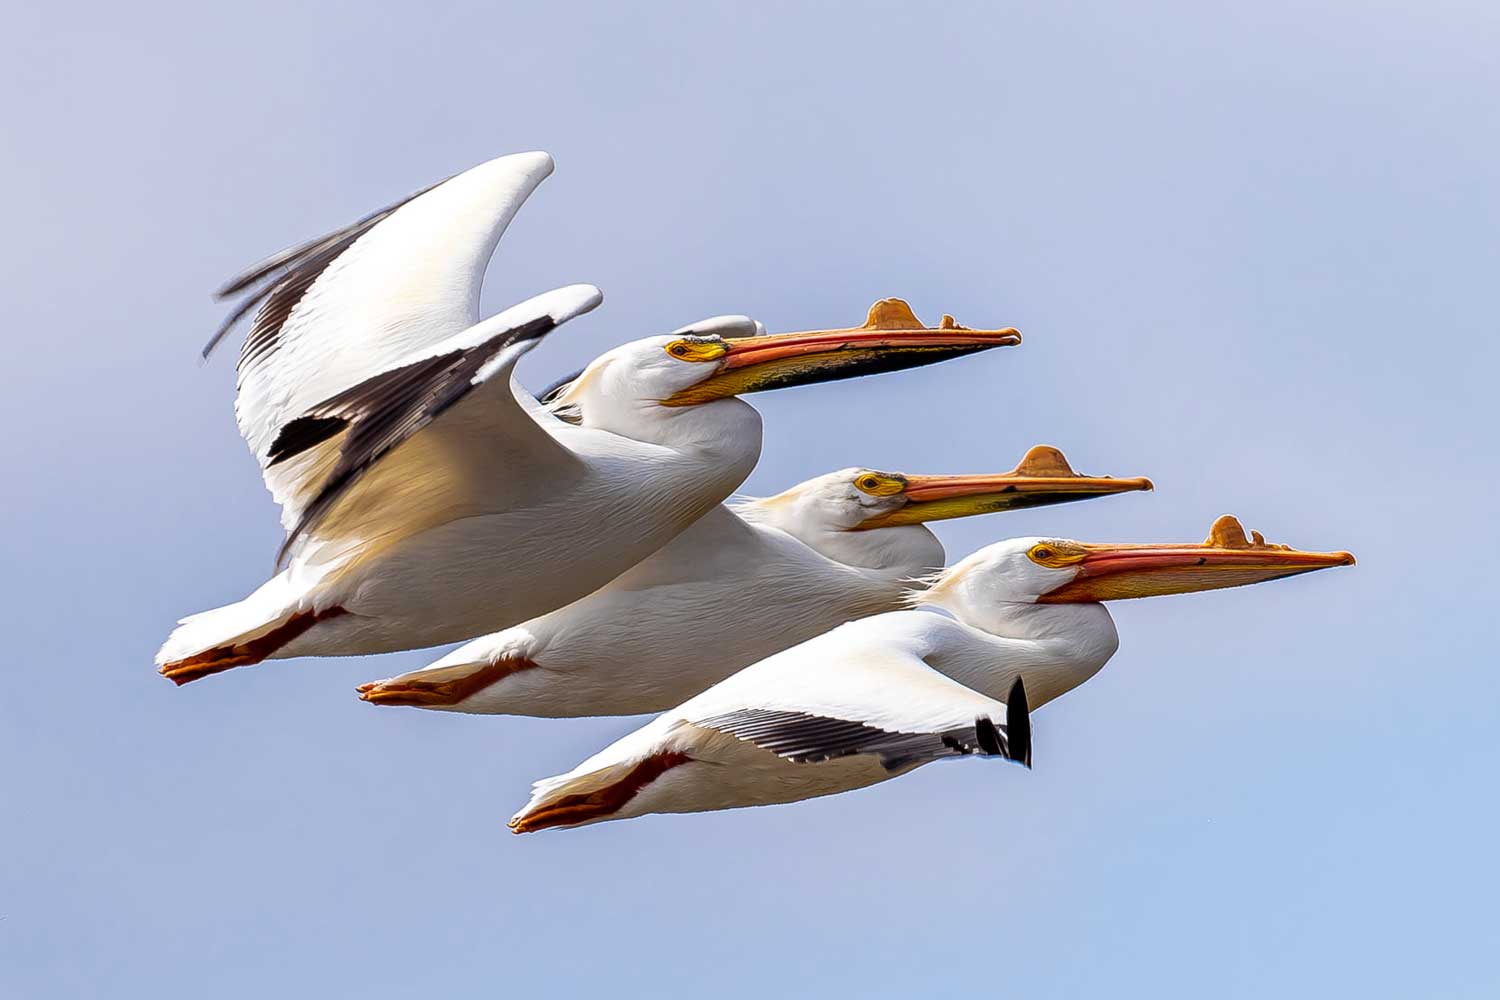 Three pelicans flying in synch.